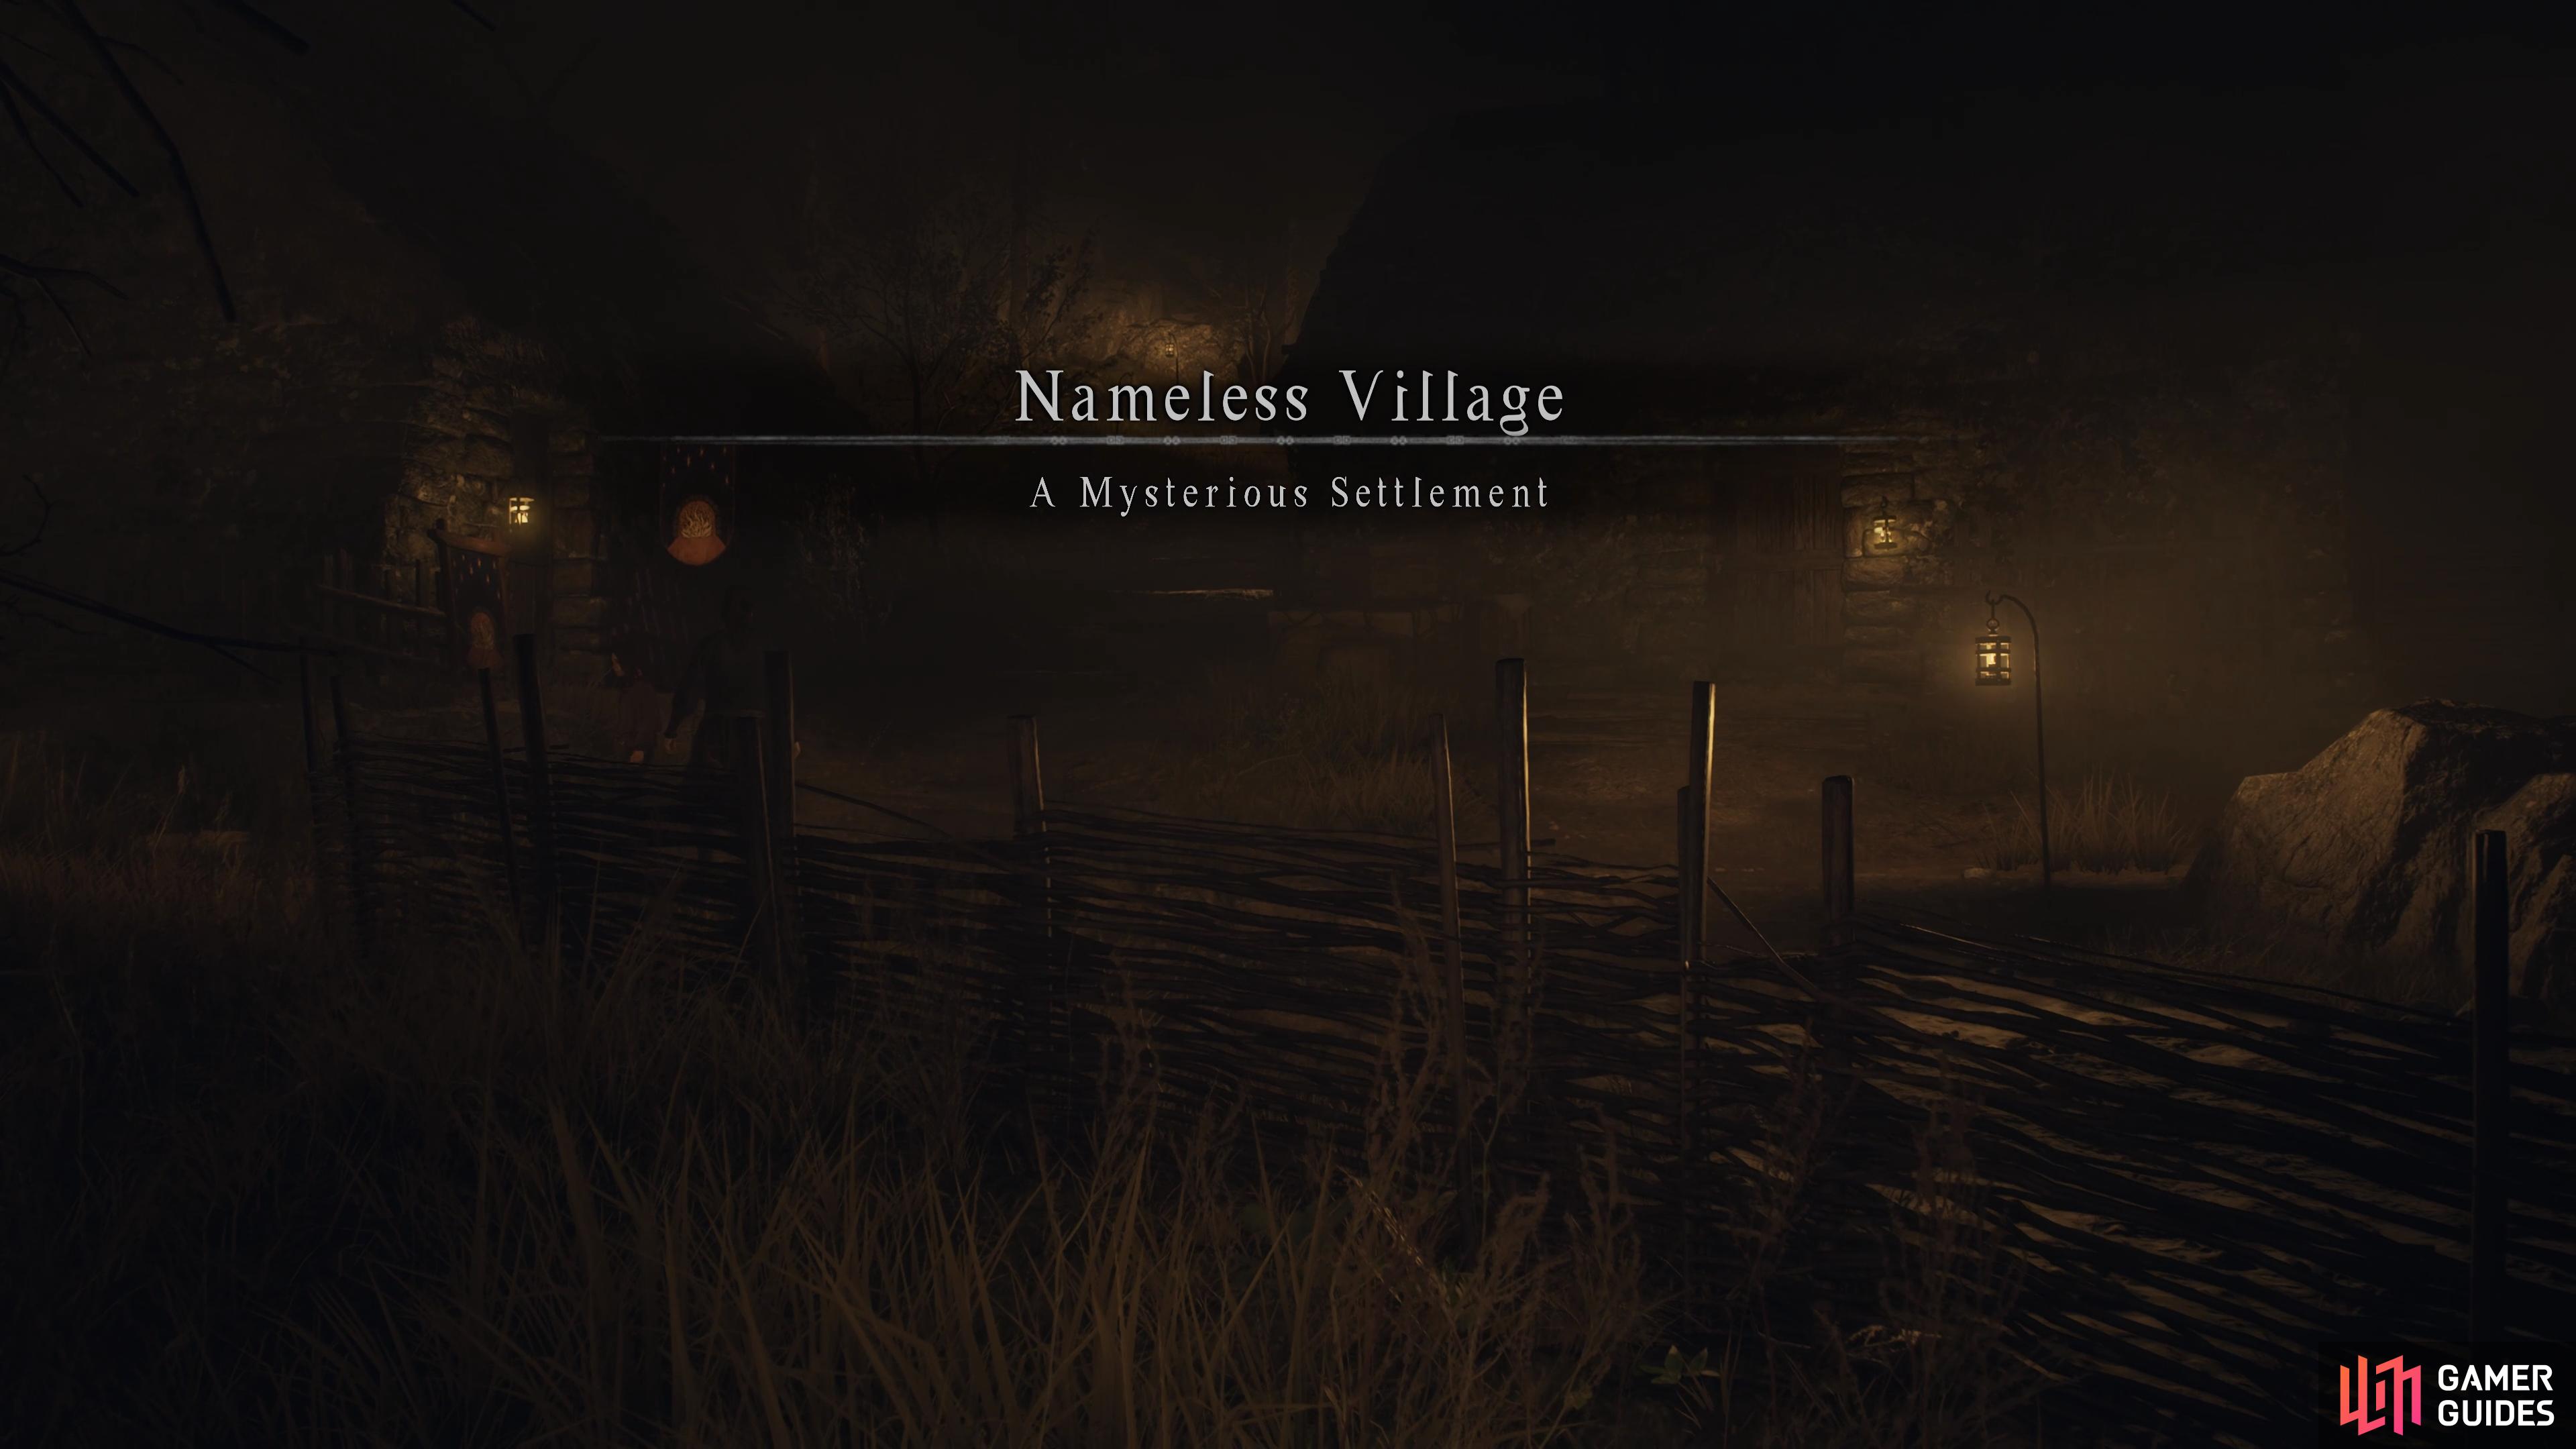 The Nameless Village is connected to the false Sovran in Dragon’s Dogma 2.